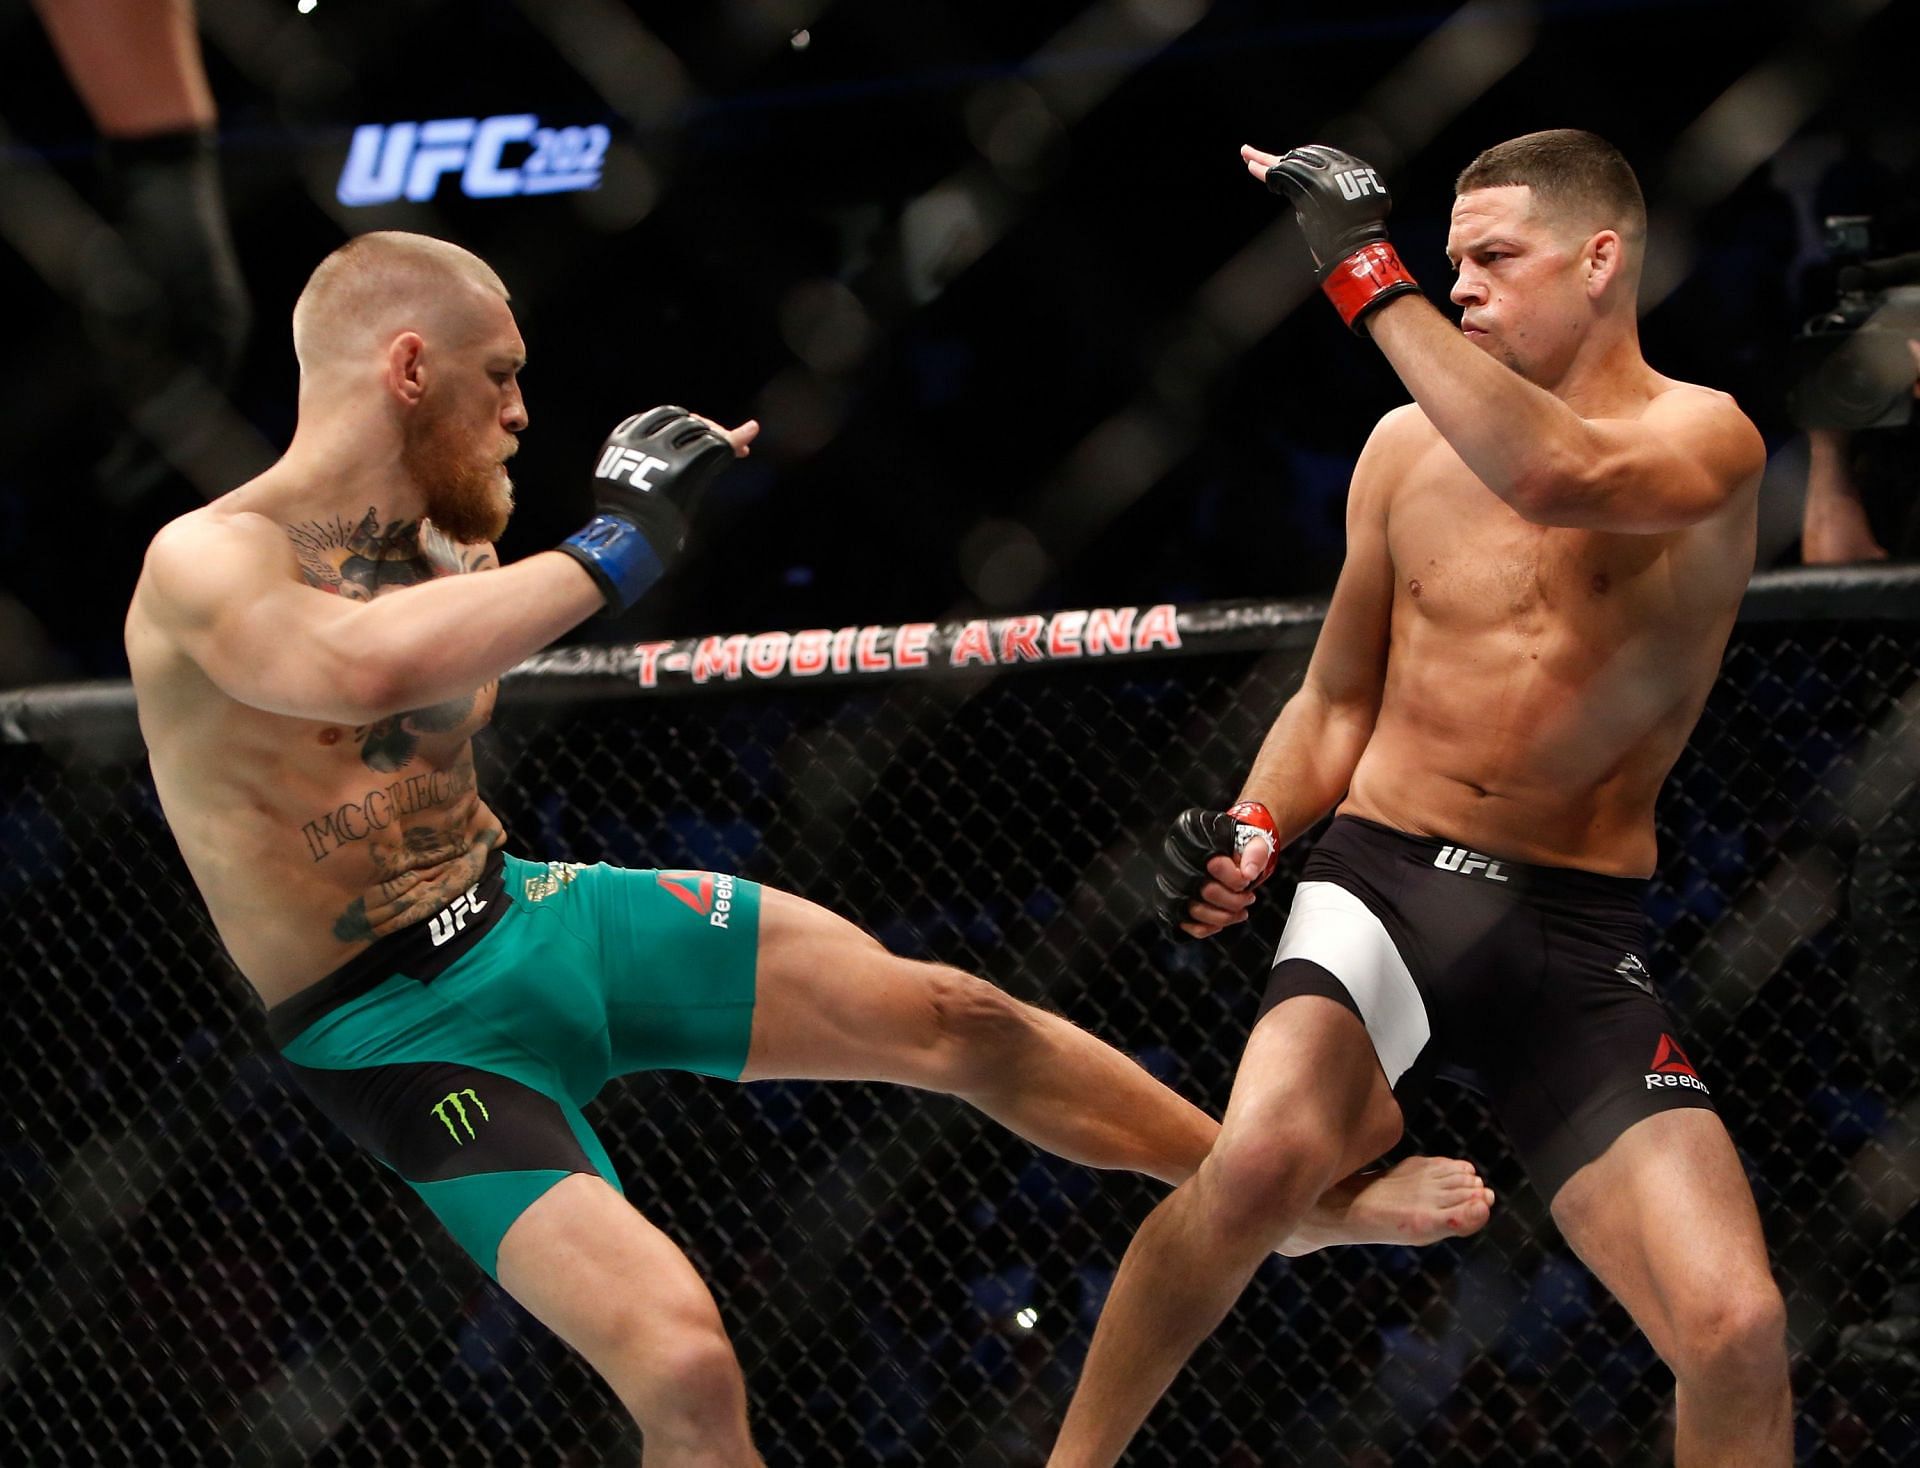 Conor McGregor (left) and Nate Diaz (right) may be the most famous rivalry in MMA history